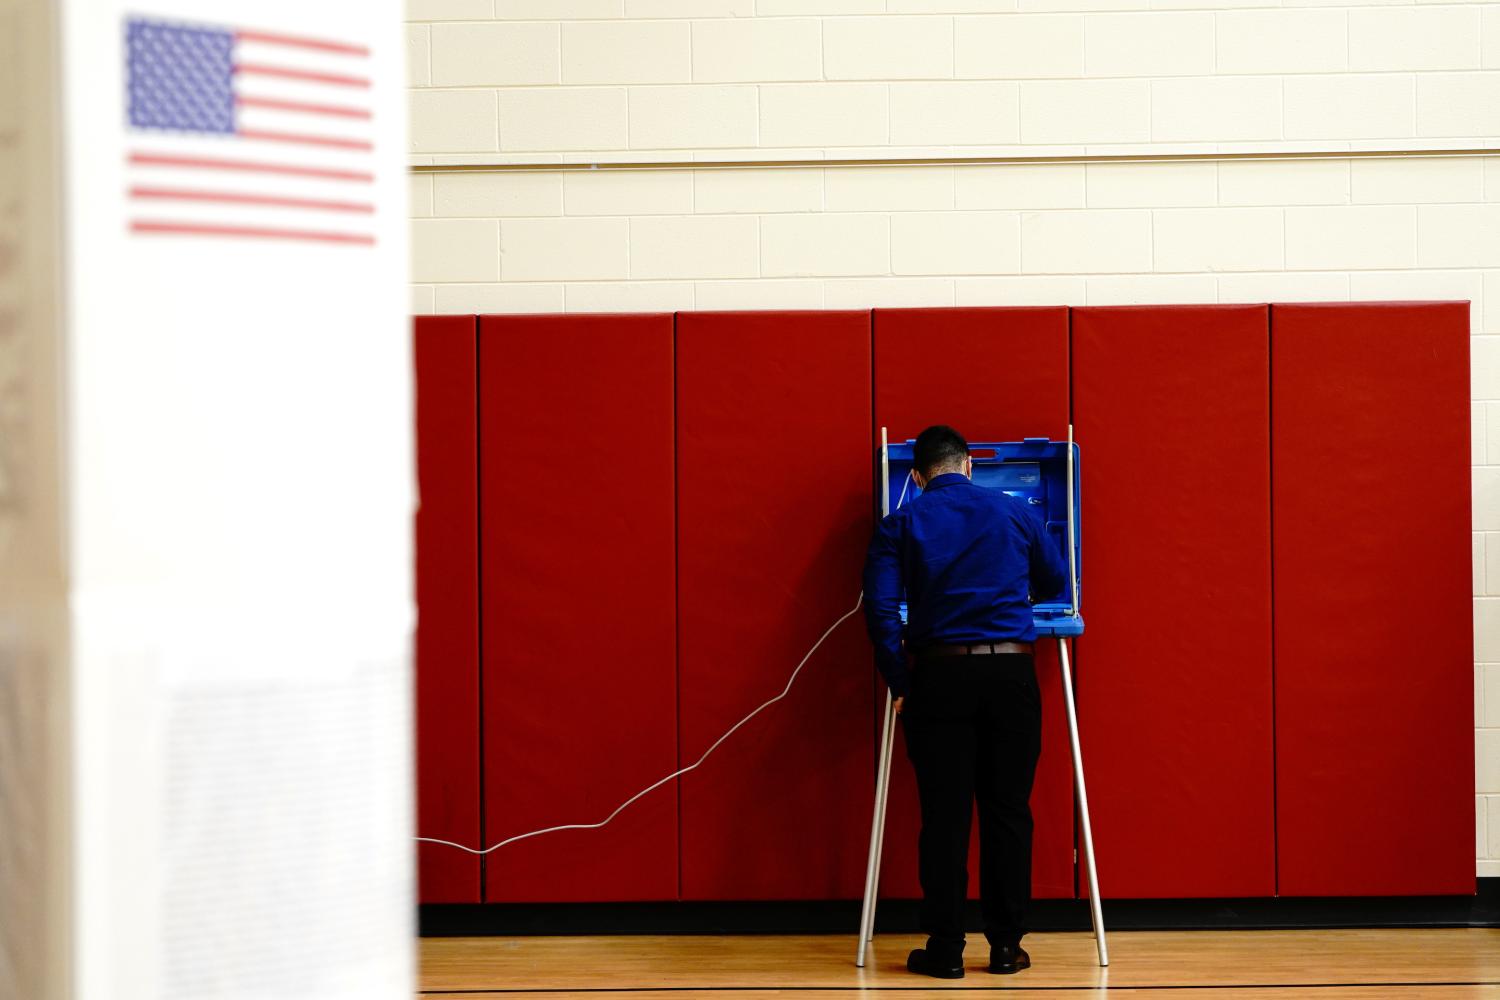 A voter completes his ballot inside a privacy booth at a polling station inside Knapp Elementary School on Election Day in Racine, Racine County, Wisconsin, U.S. November 3, 2020. REUTERS/Bing Guan